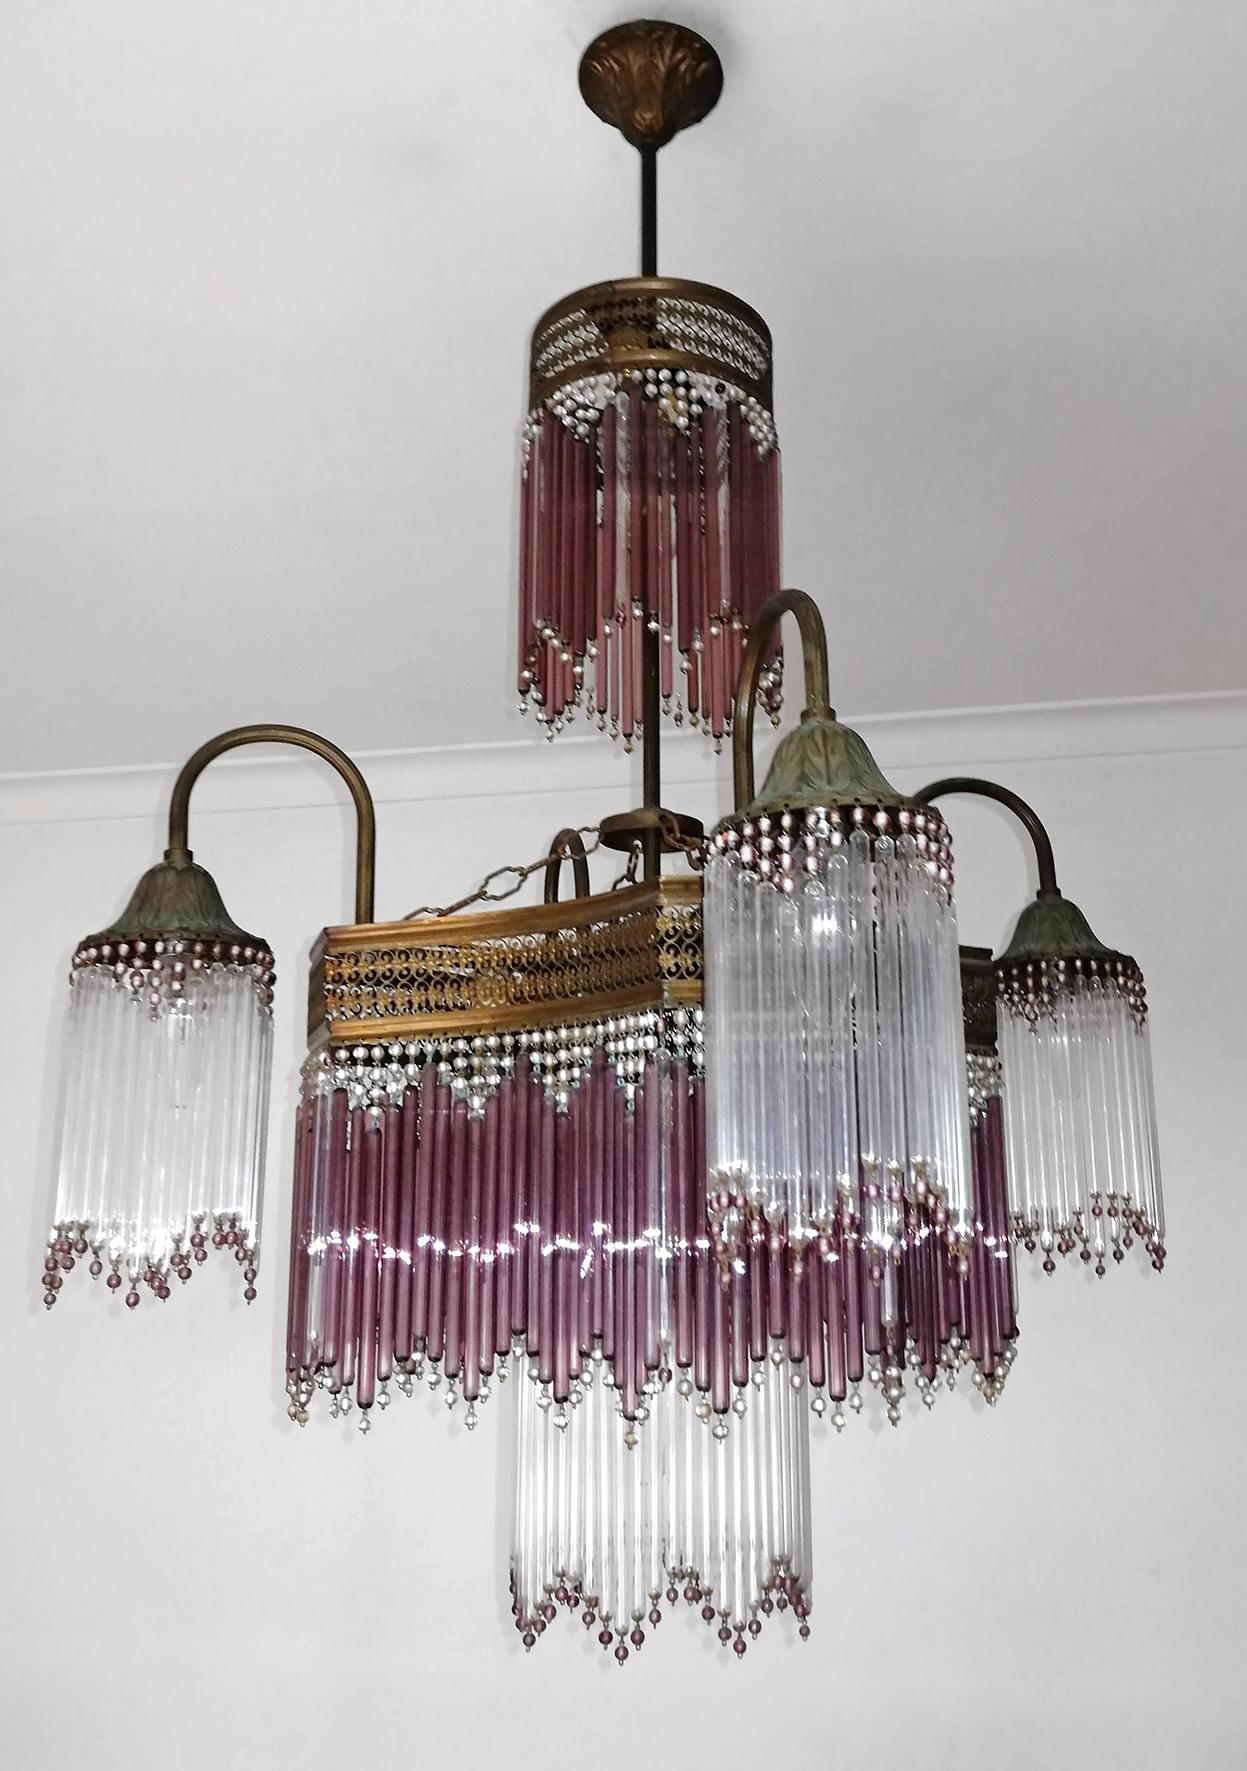 Fabulous midcentury chandelier in clear and pink purple glass and beads.
Measures:
Diameter 24 in/ 60 cm
Height 36 in/ 90 cm
7-light bulbs E14/ good working condition.
Age patina.
Assembly required. Bulbs not included.